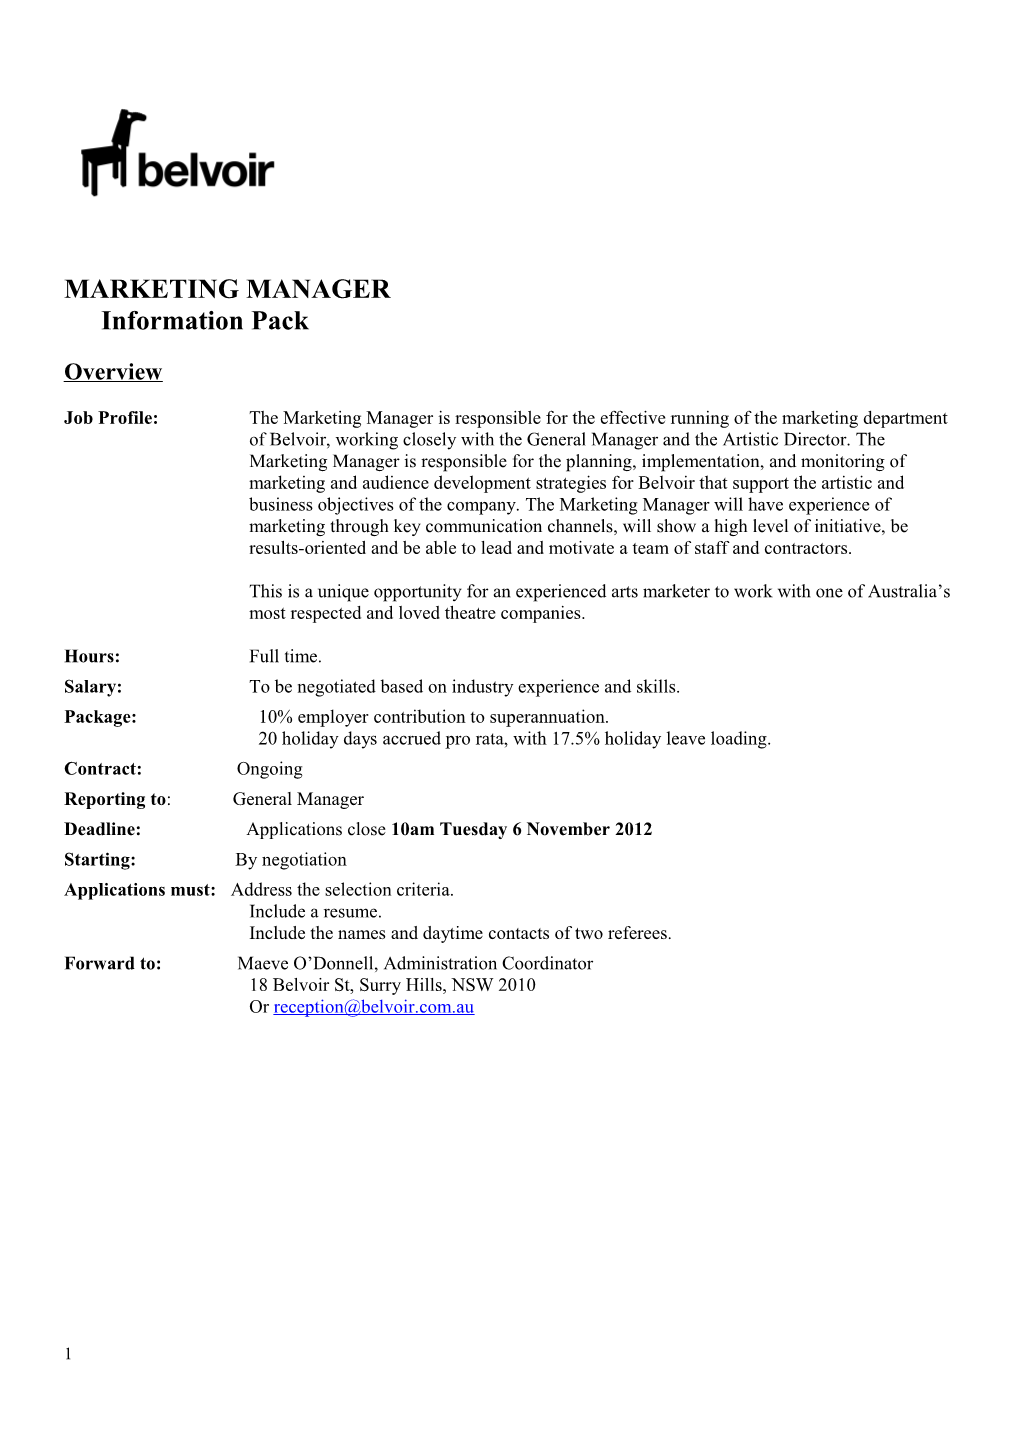 Information Package: Administrator